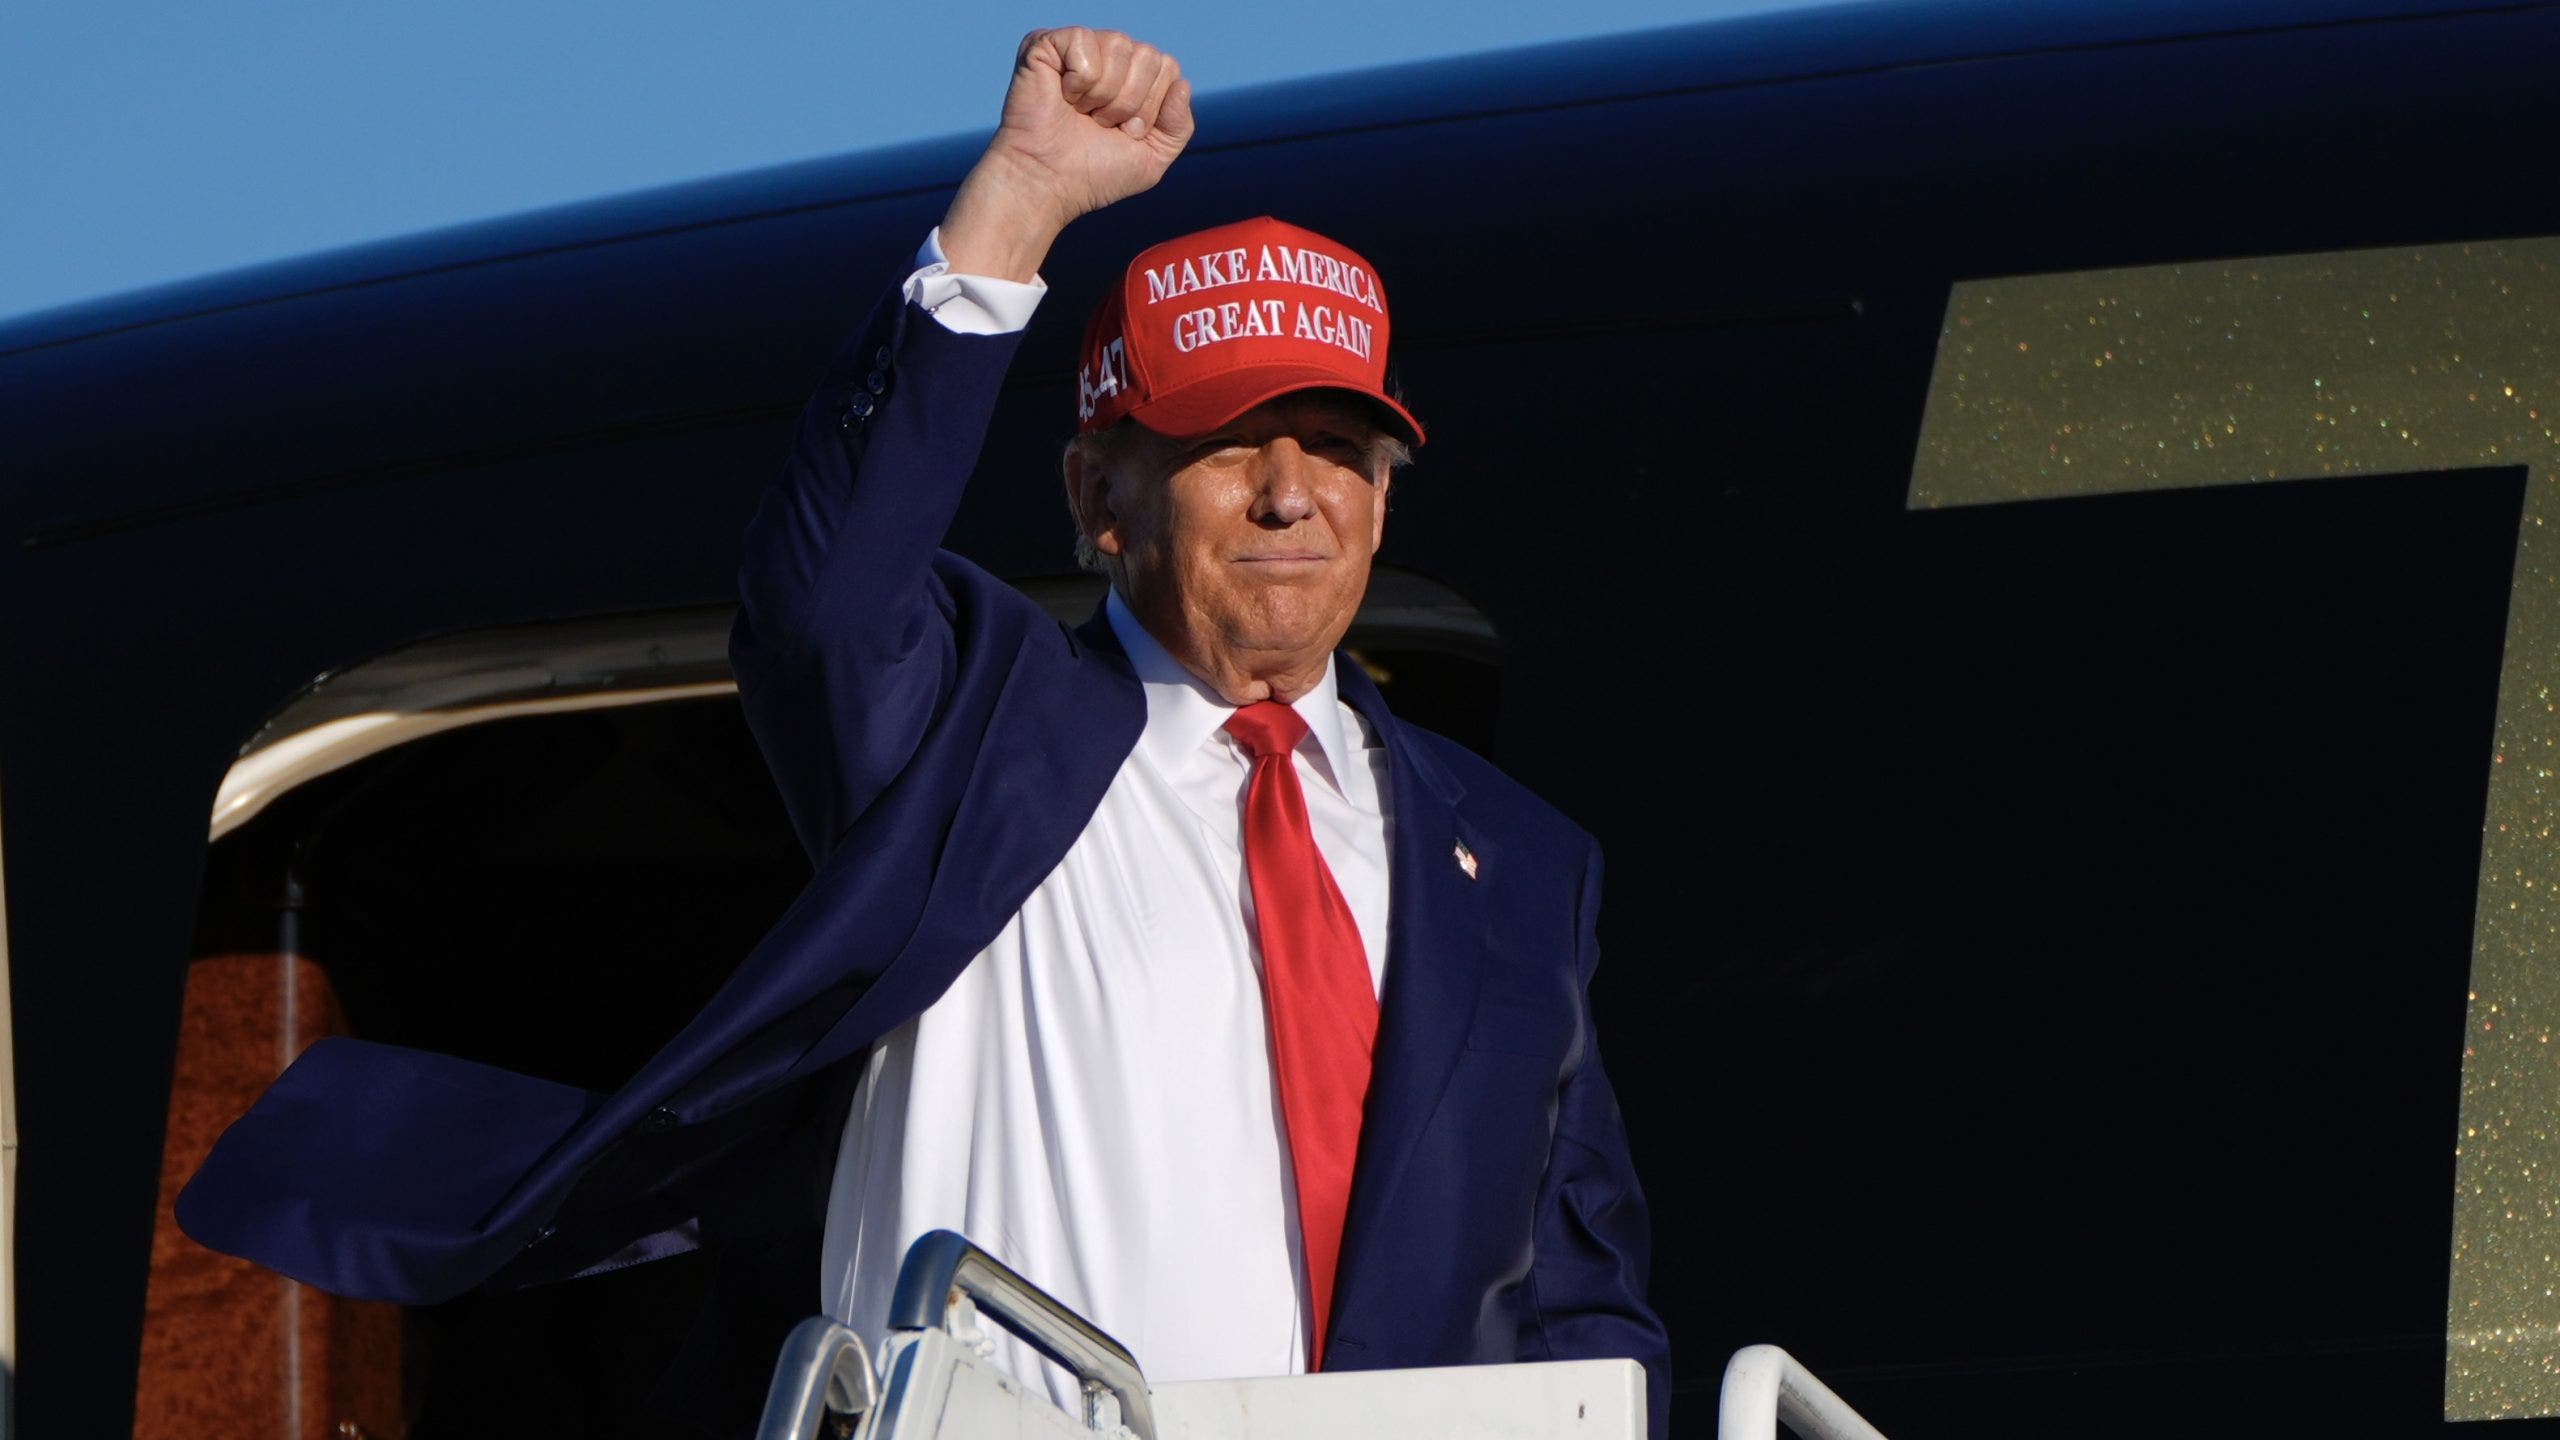 Trump predicts he will be the first GOP candidate to flip this blue state in 34 years